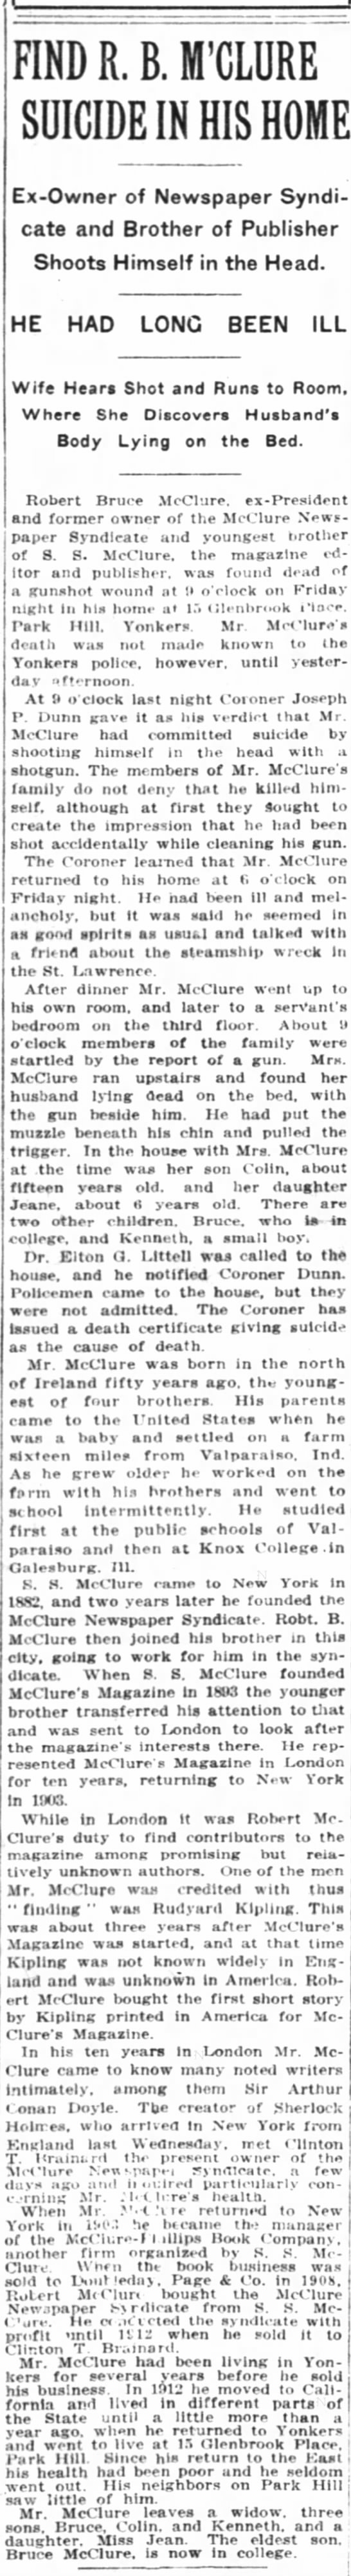 NY Times front page story on the suicide of Robert Bruce McClure -- Sunday May 31, 1914 - 